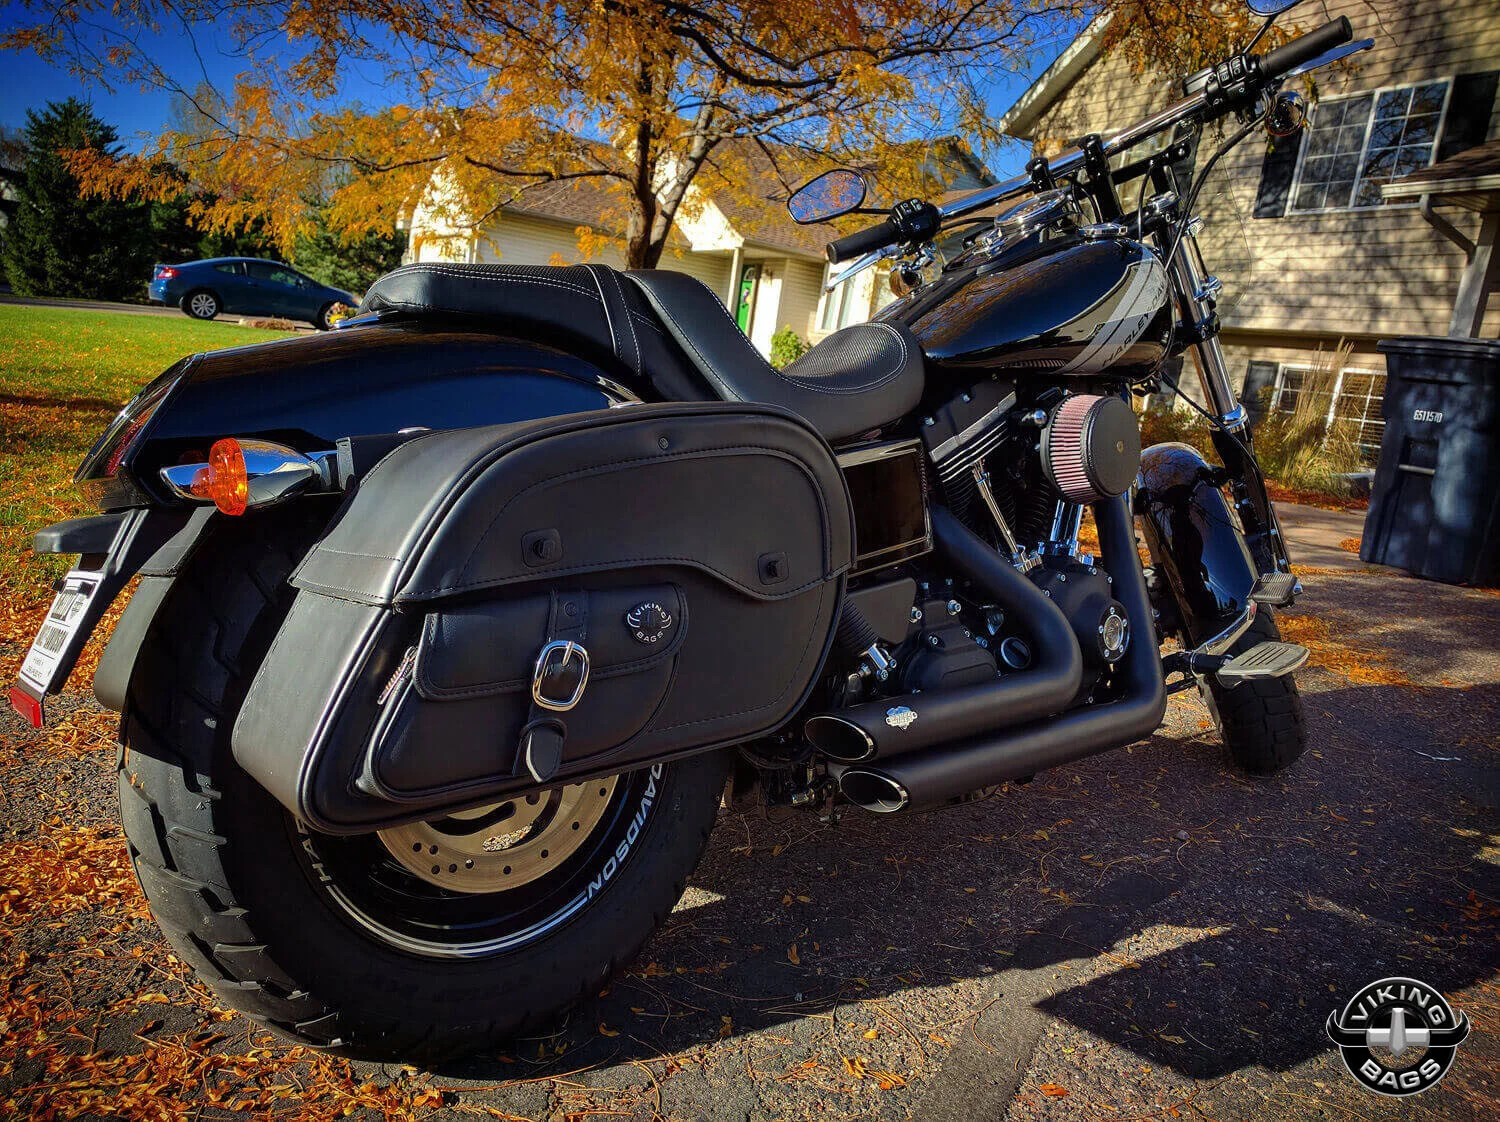 Motorcycle Luggage for New Hampshire Motorcycle Tour - Best Roads and Destinations